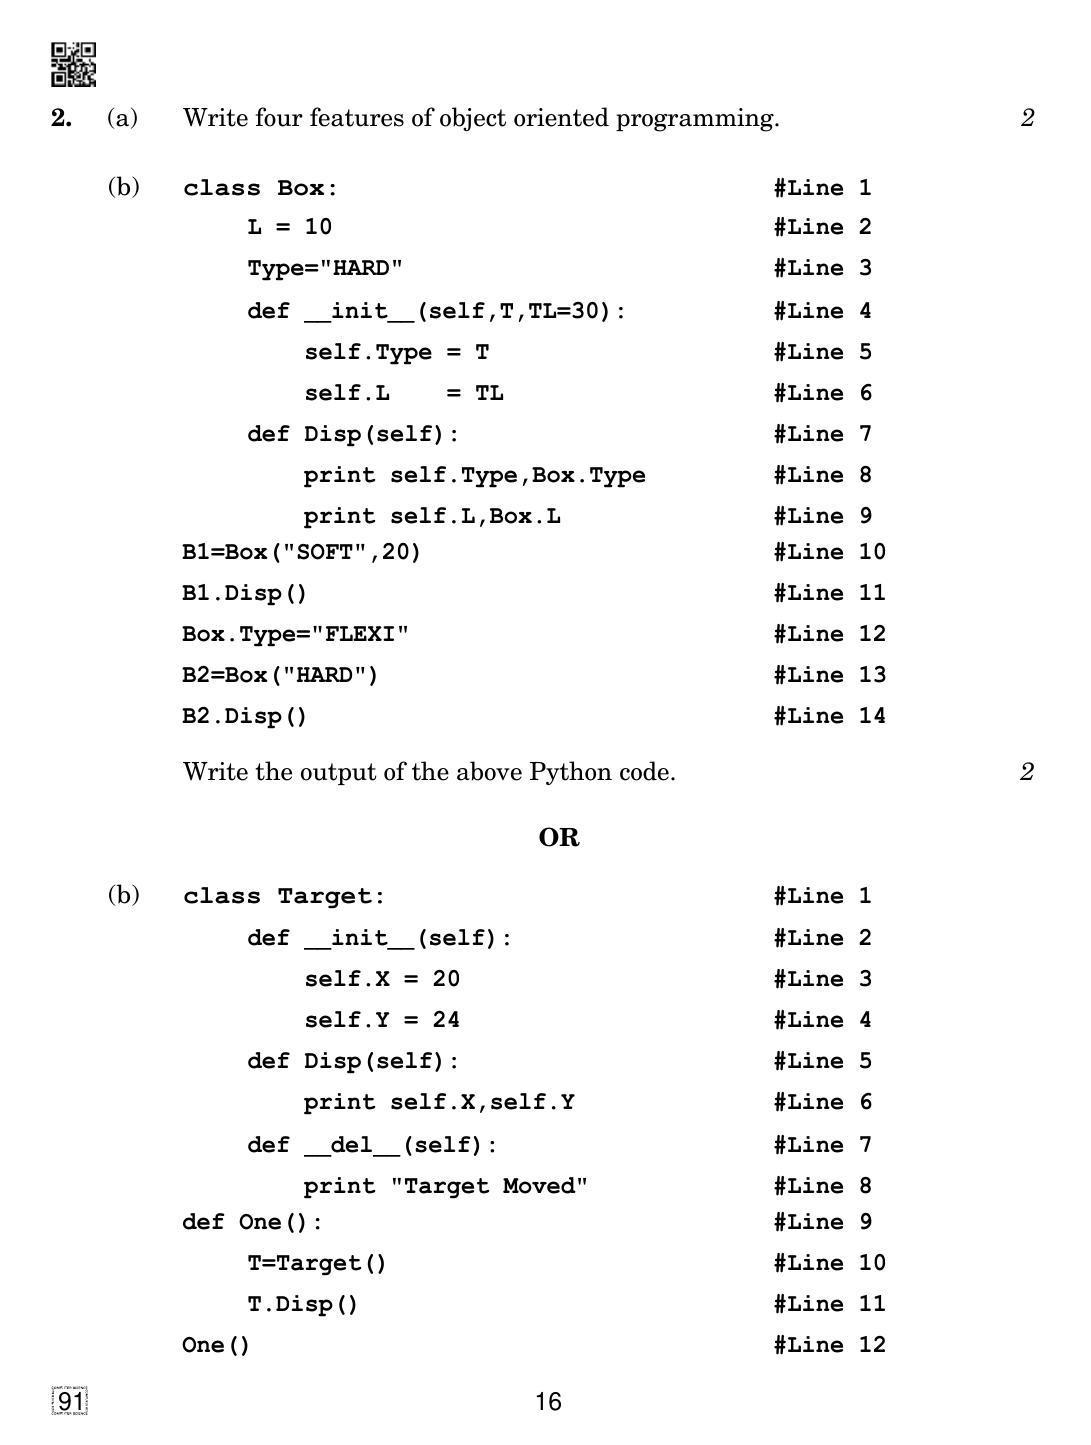 CBSE Class 12 91 Computer Science 2019 Question Paper - Page 16